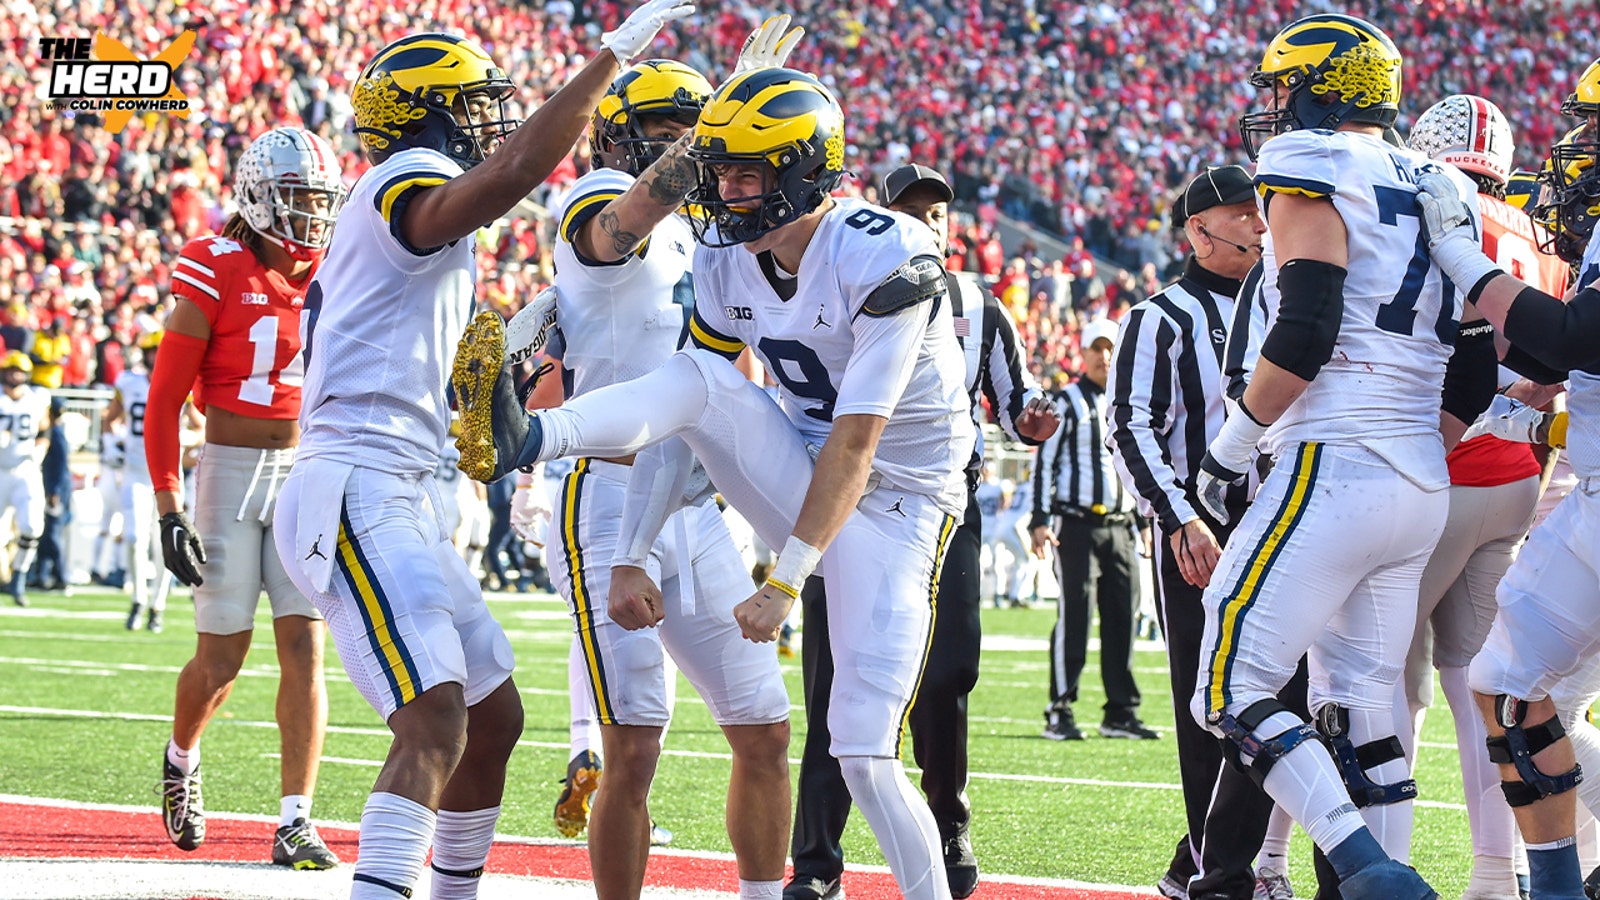 Has Michigan officially overtaken Ohio State?